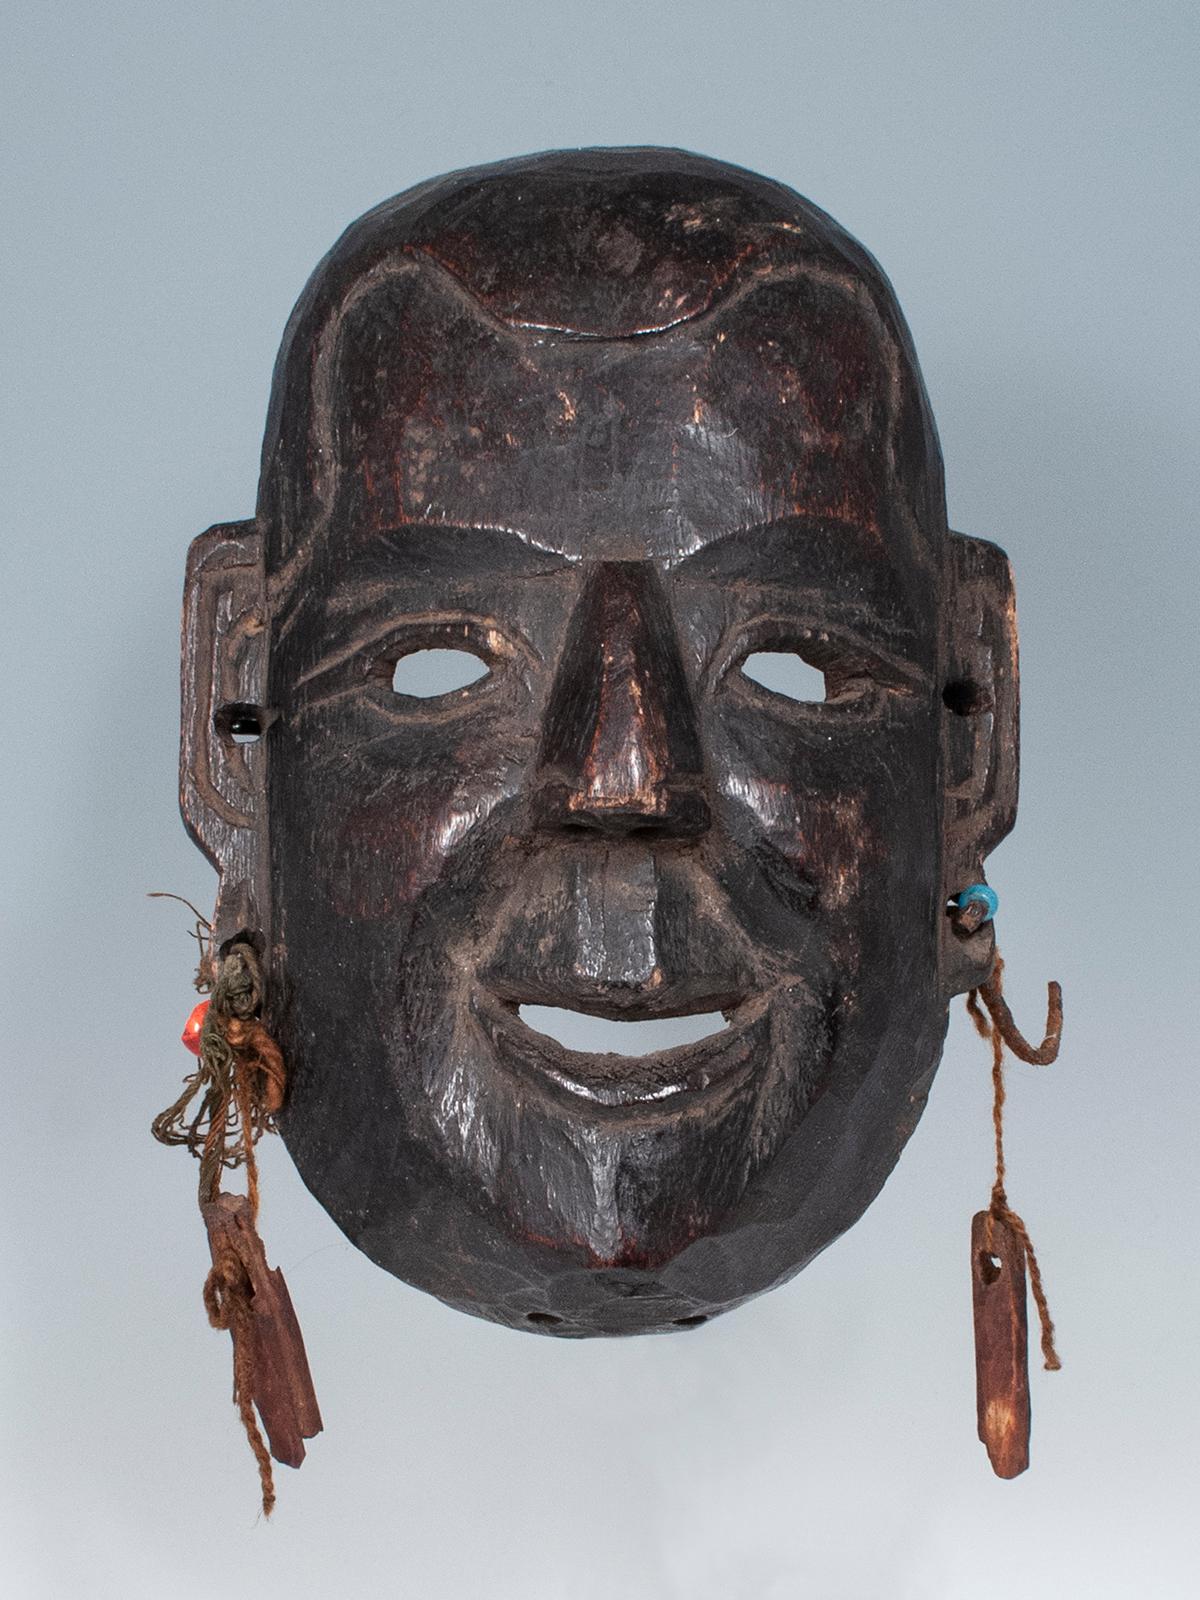 Mask, Monpa-Sherdukpen people, Arunachal Pradesh, India

A mask from the Monpa/Sherdukpen people of Arunachal Pradesh, which is thought to be a monk or one of the sons of Apapek. It is featured on the cover of a large book by Peter van Ham titled